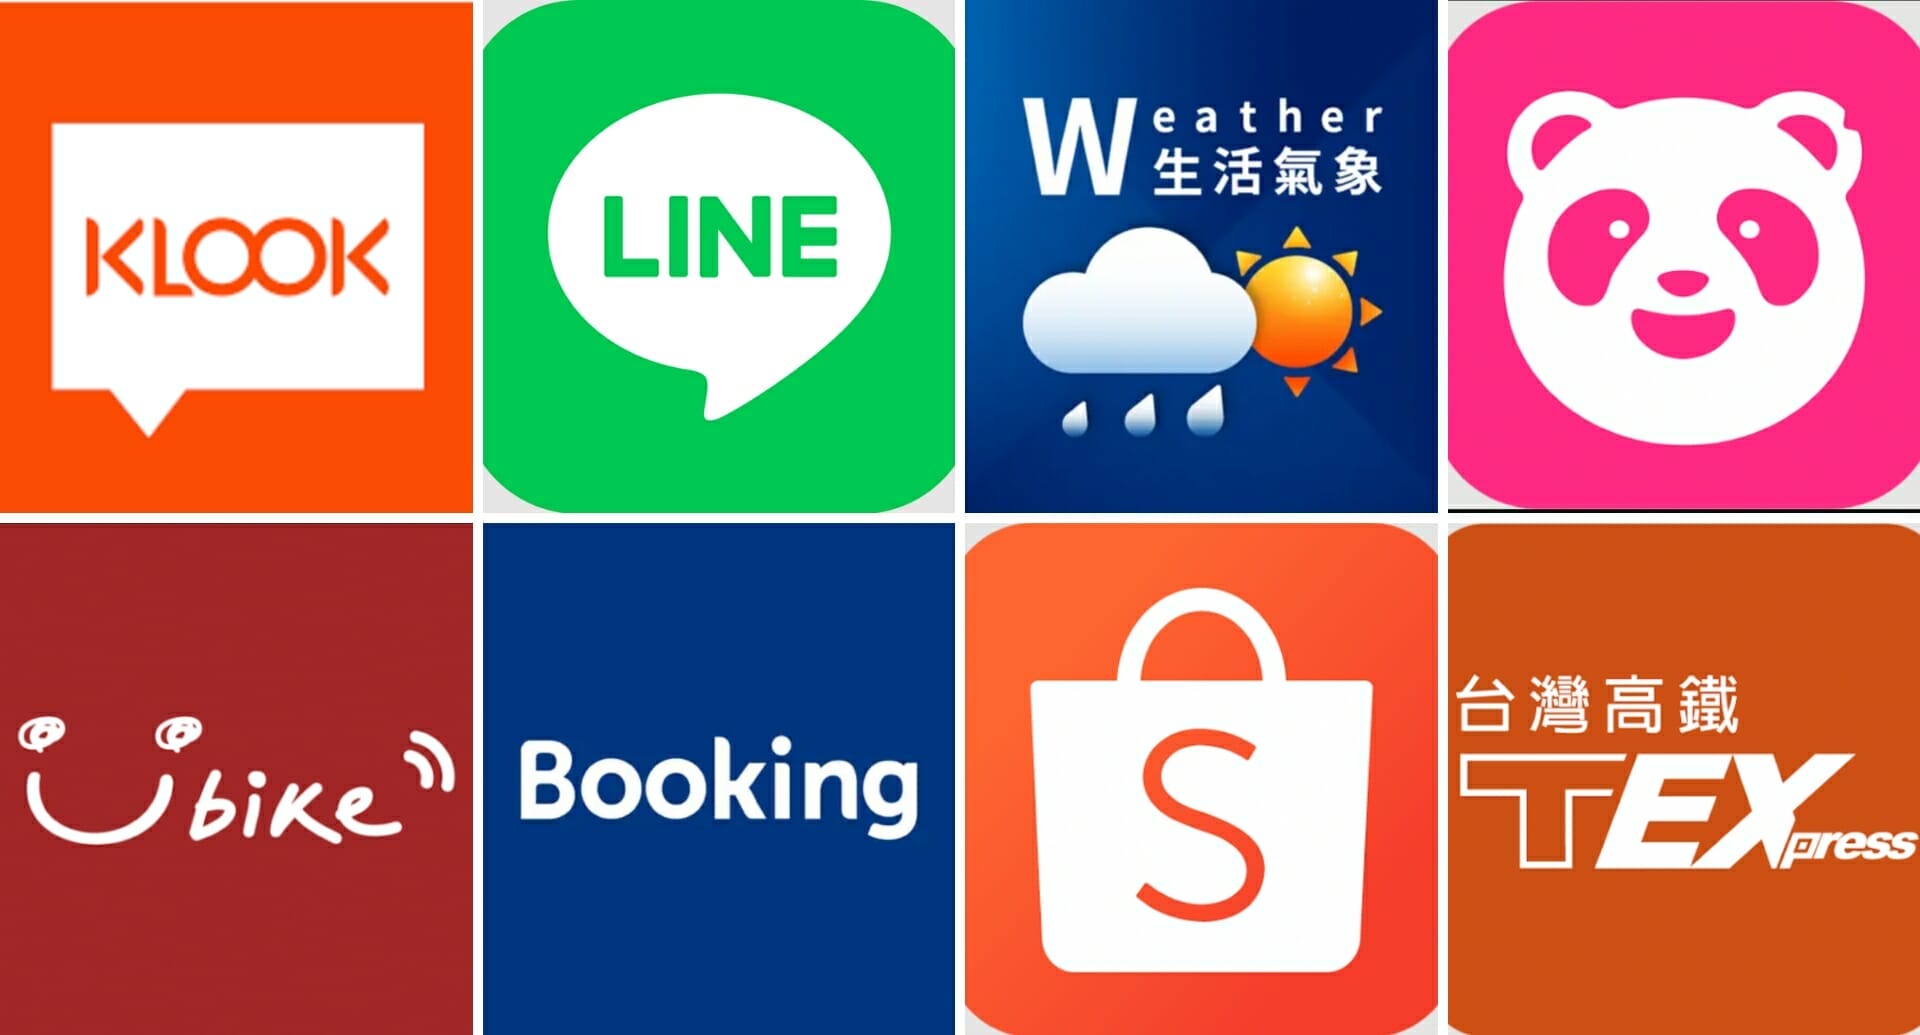 Which app is Taiwan using?